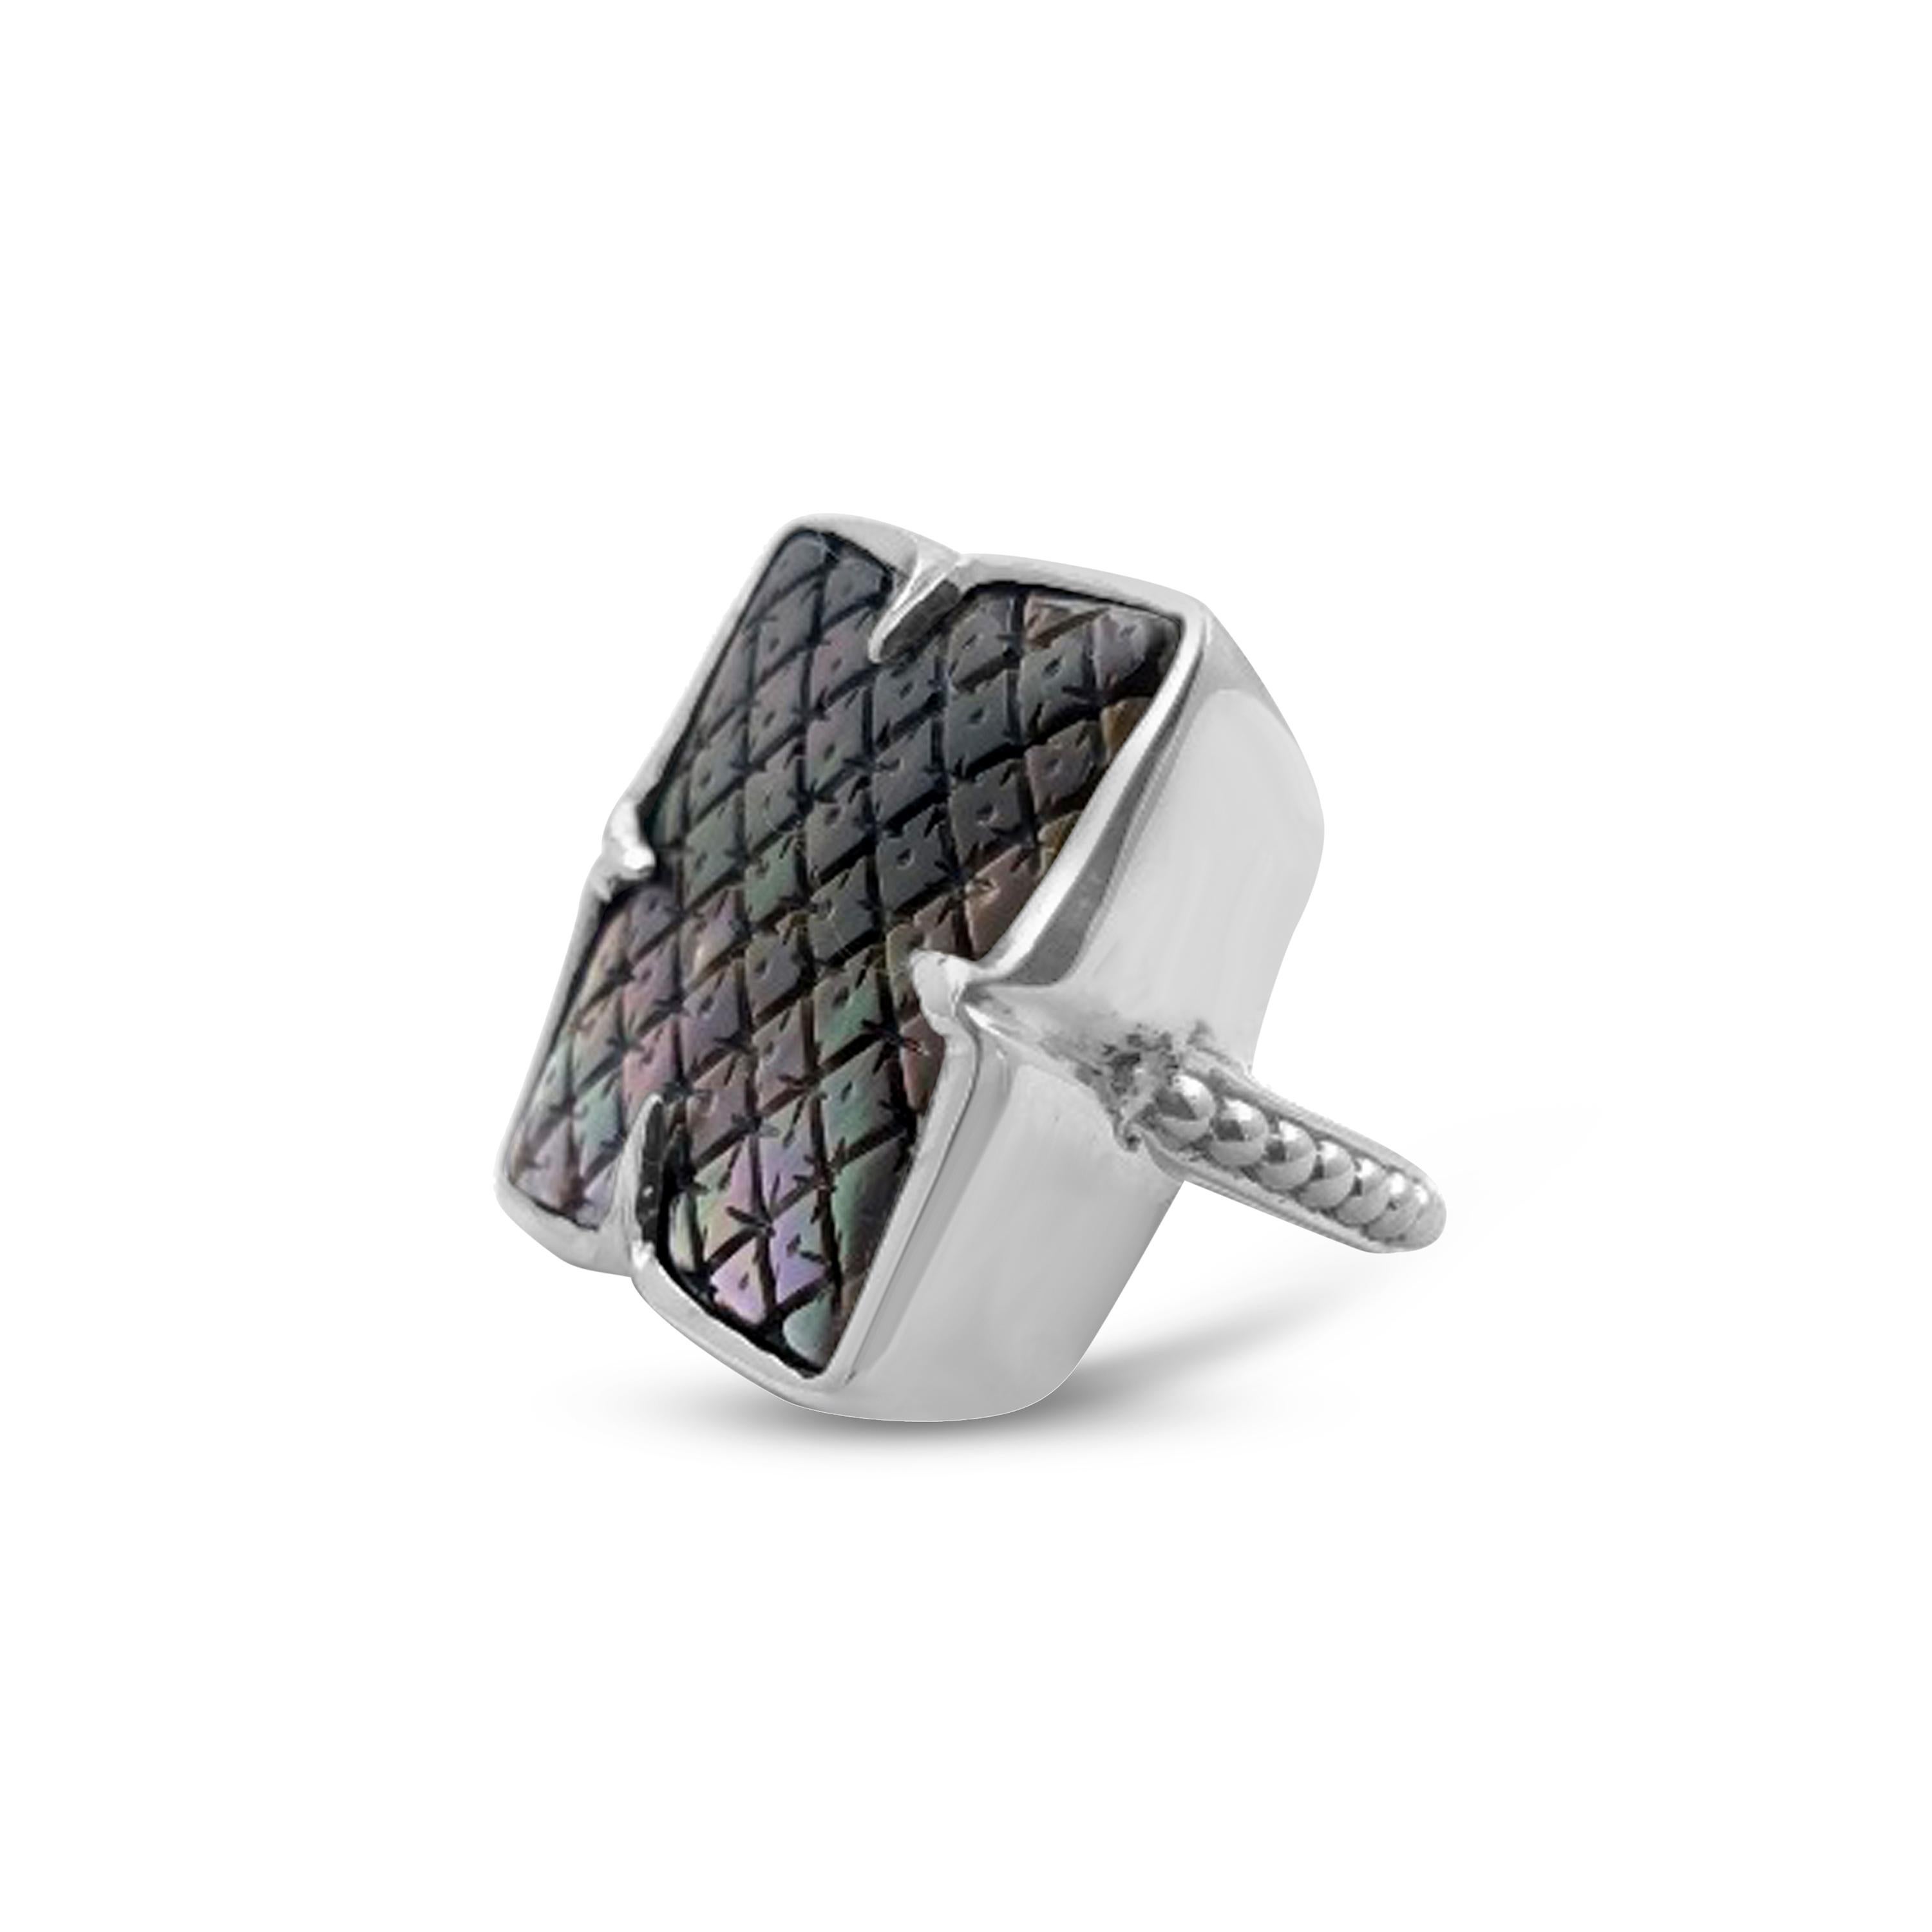 • Stephen Dweck Carventurous Collection  
• 925 Sterling Silver
• 0.98” X 1.05”
Indulge in the exquisite luxury of Stephen Dweck's latest masterpiece, a carved black mother of pearl ring in sterling silver. Skillfully crafted by master artisans,